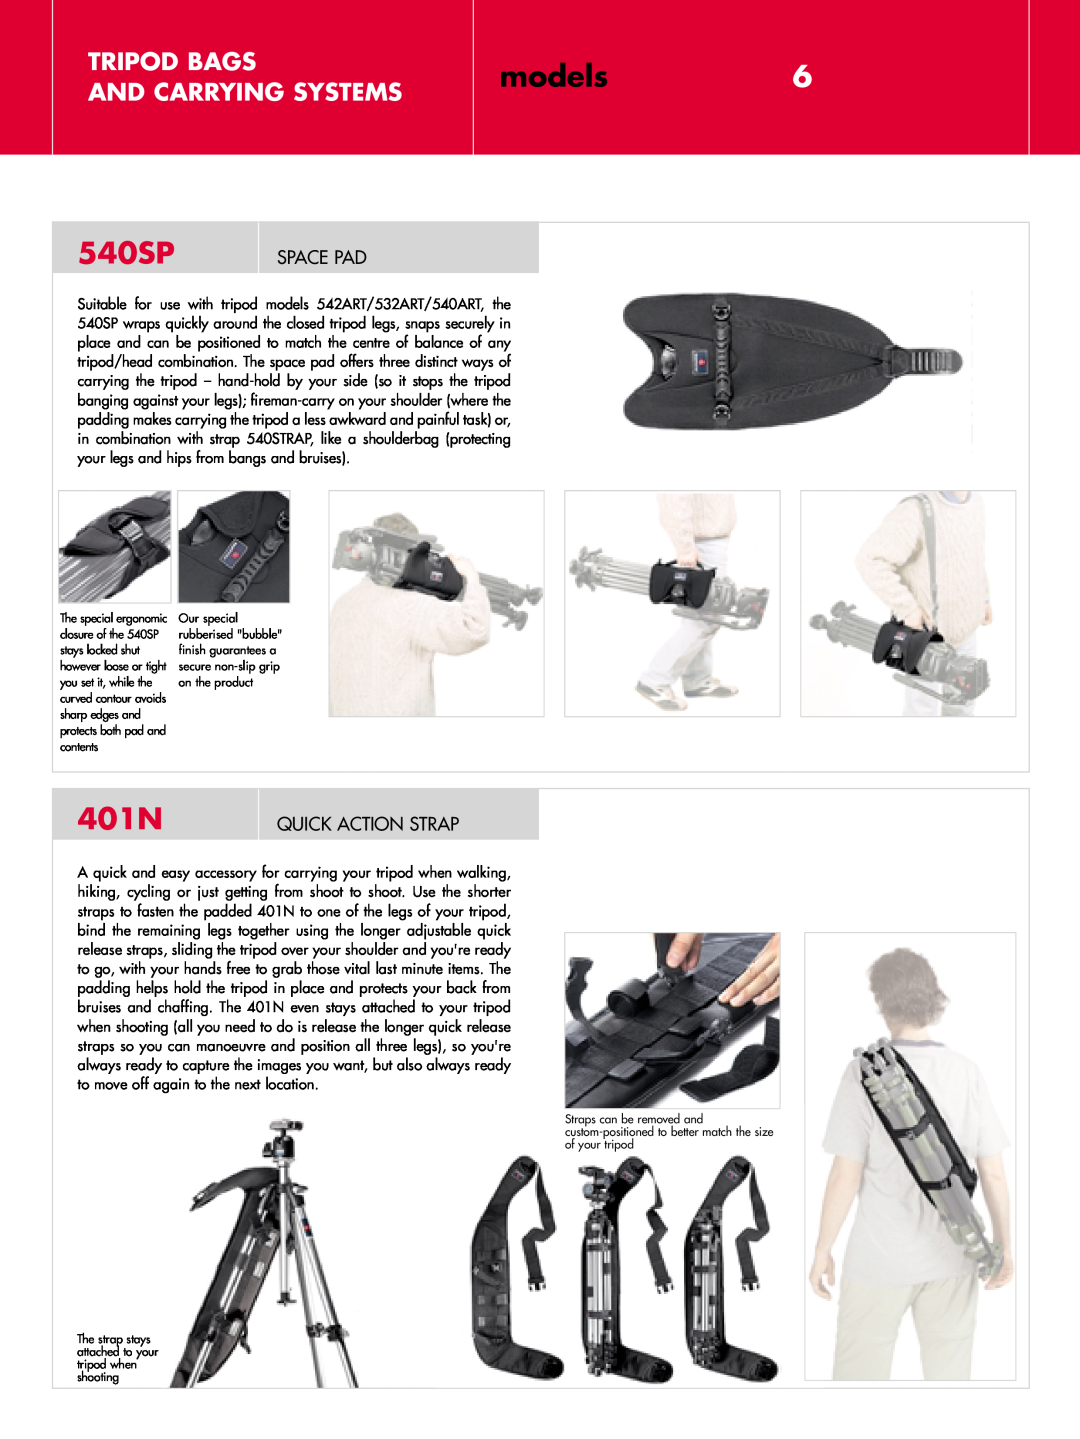 Manfrotto MBAGD, MBAG70, MBAG120P models6, 540SP, 401N, Tripod Bags And Carrying Systems, Space Pad, Quick Action Strap 